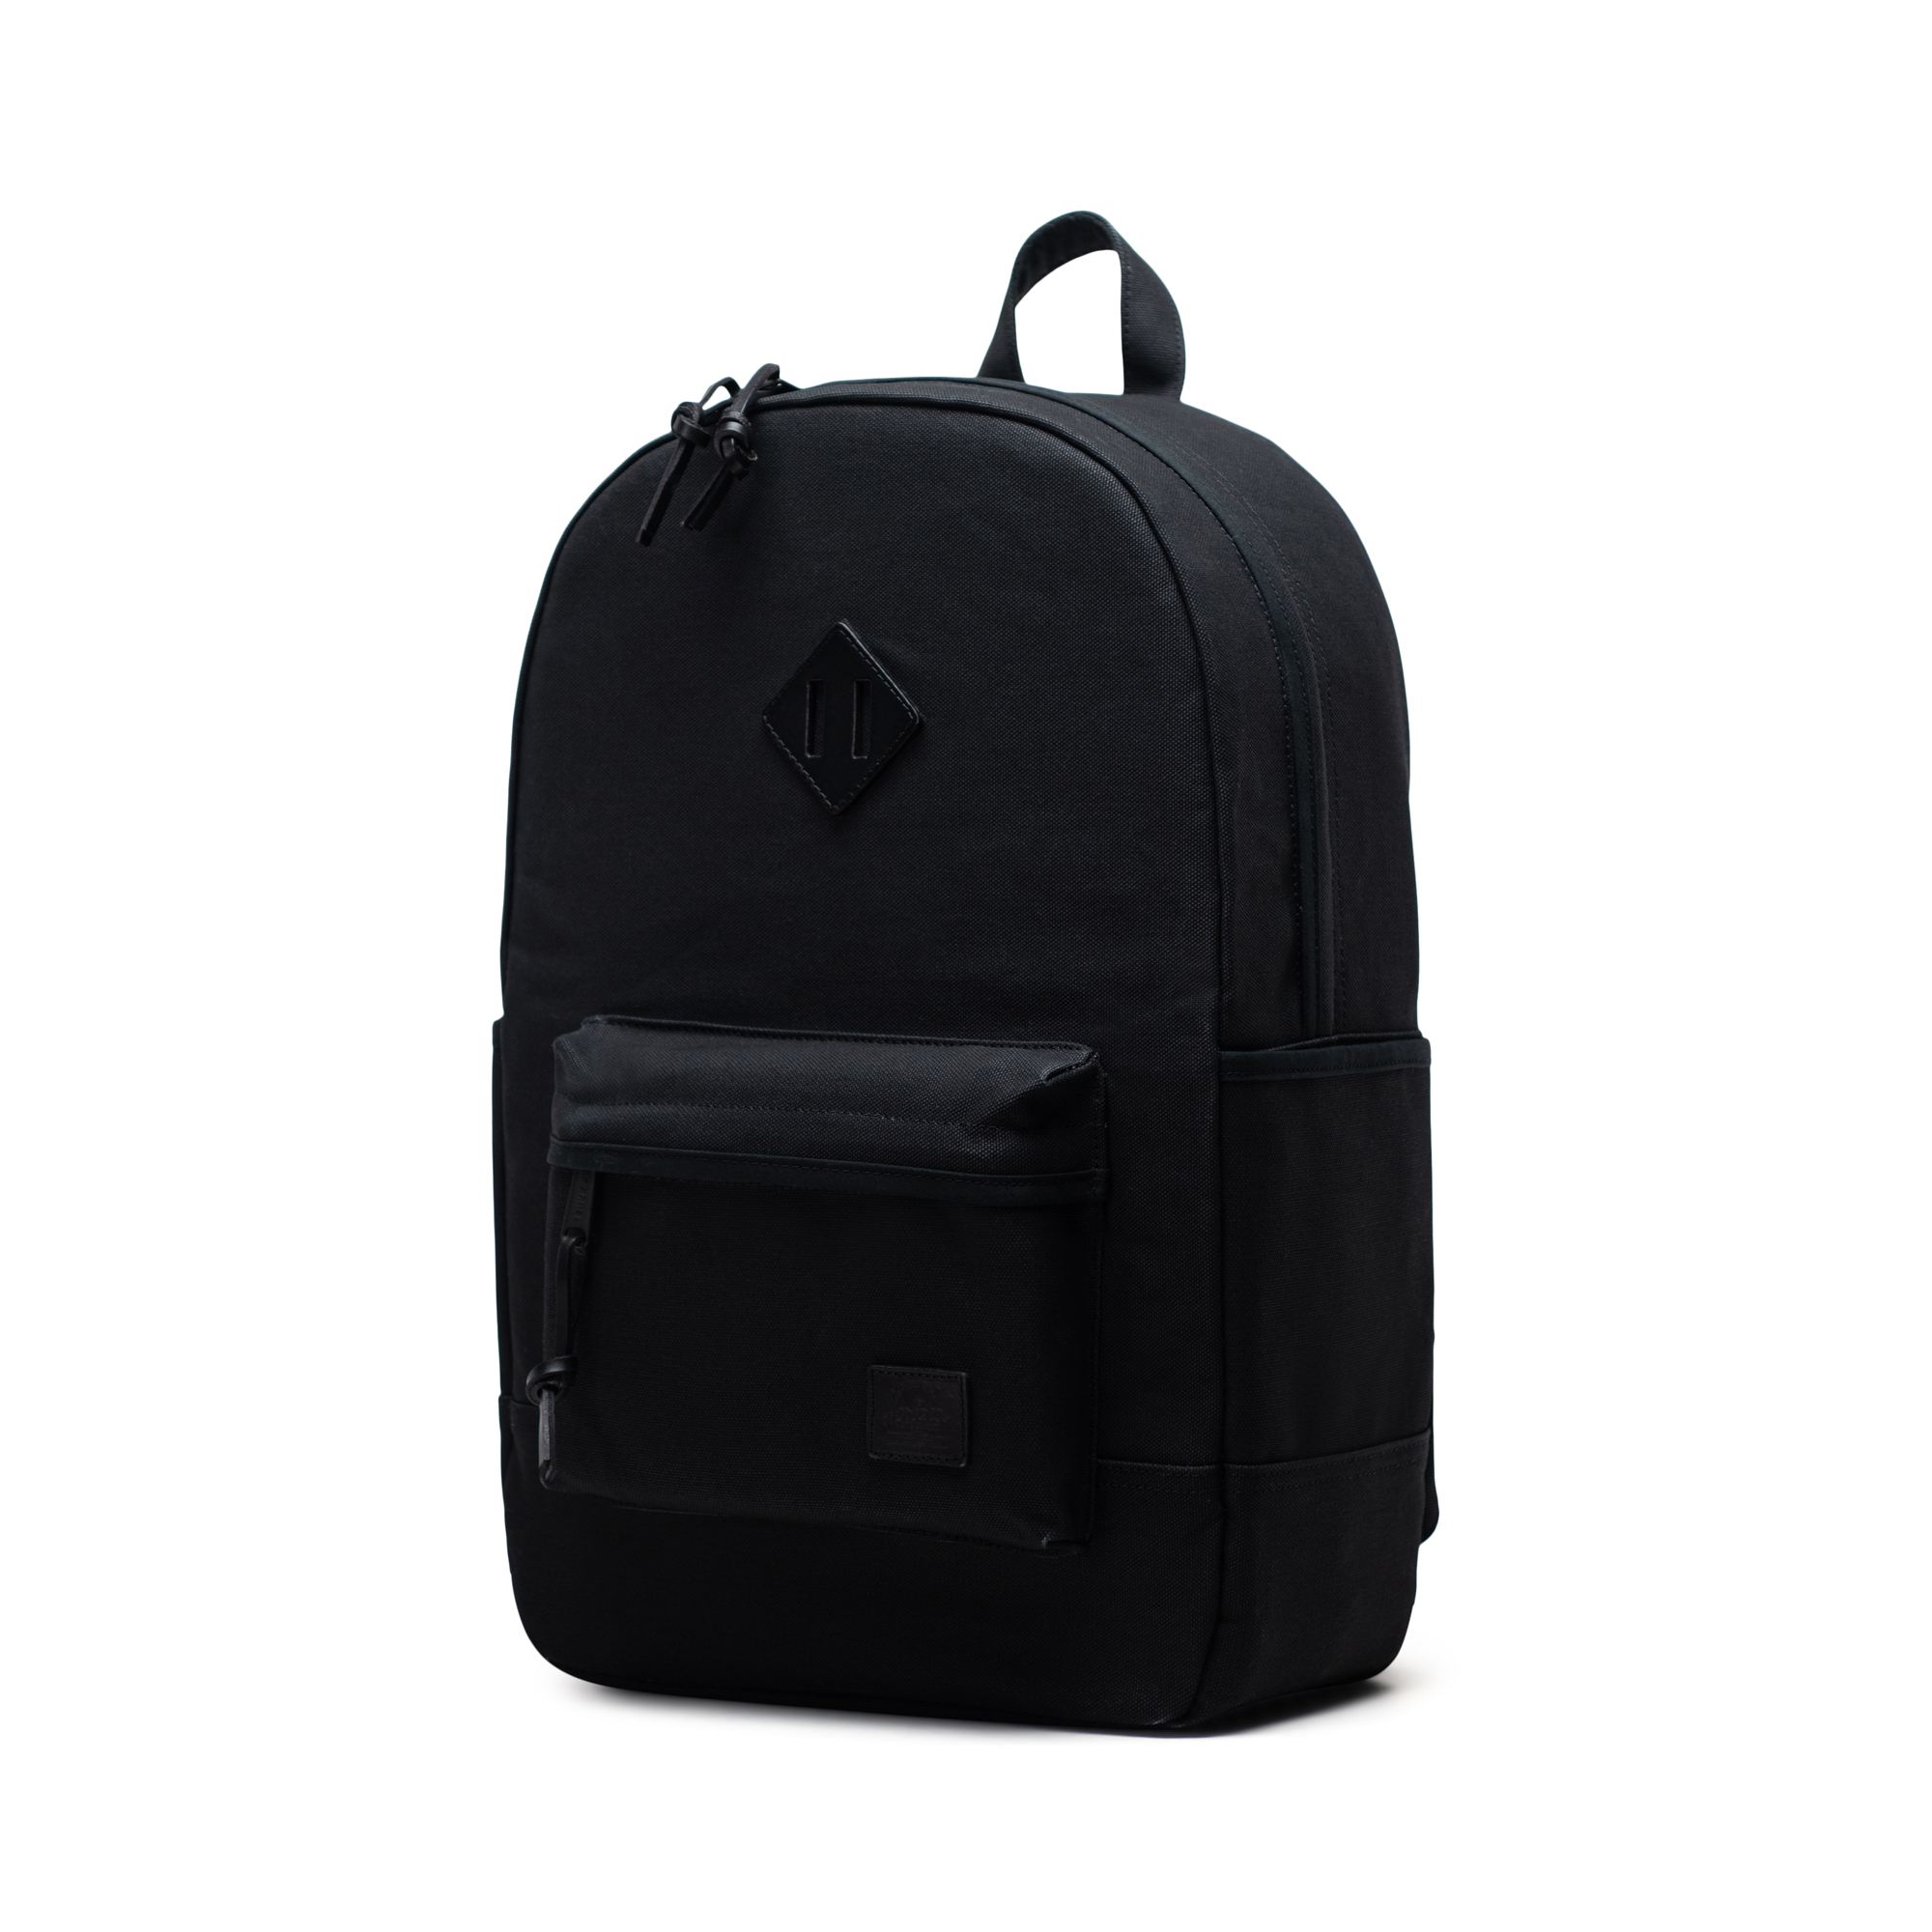 Heritage Backpack Heavyweight Canvas | Herschel Supply Company